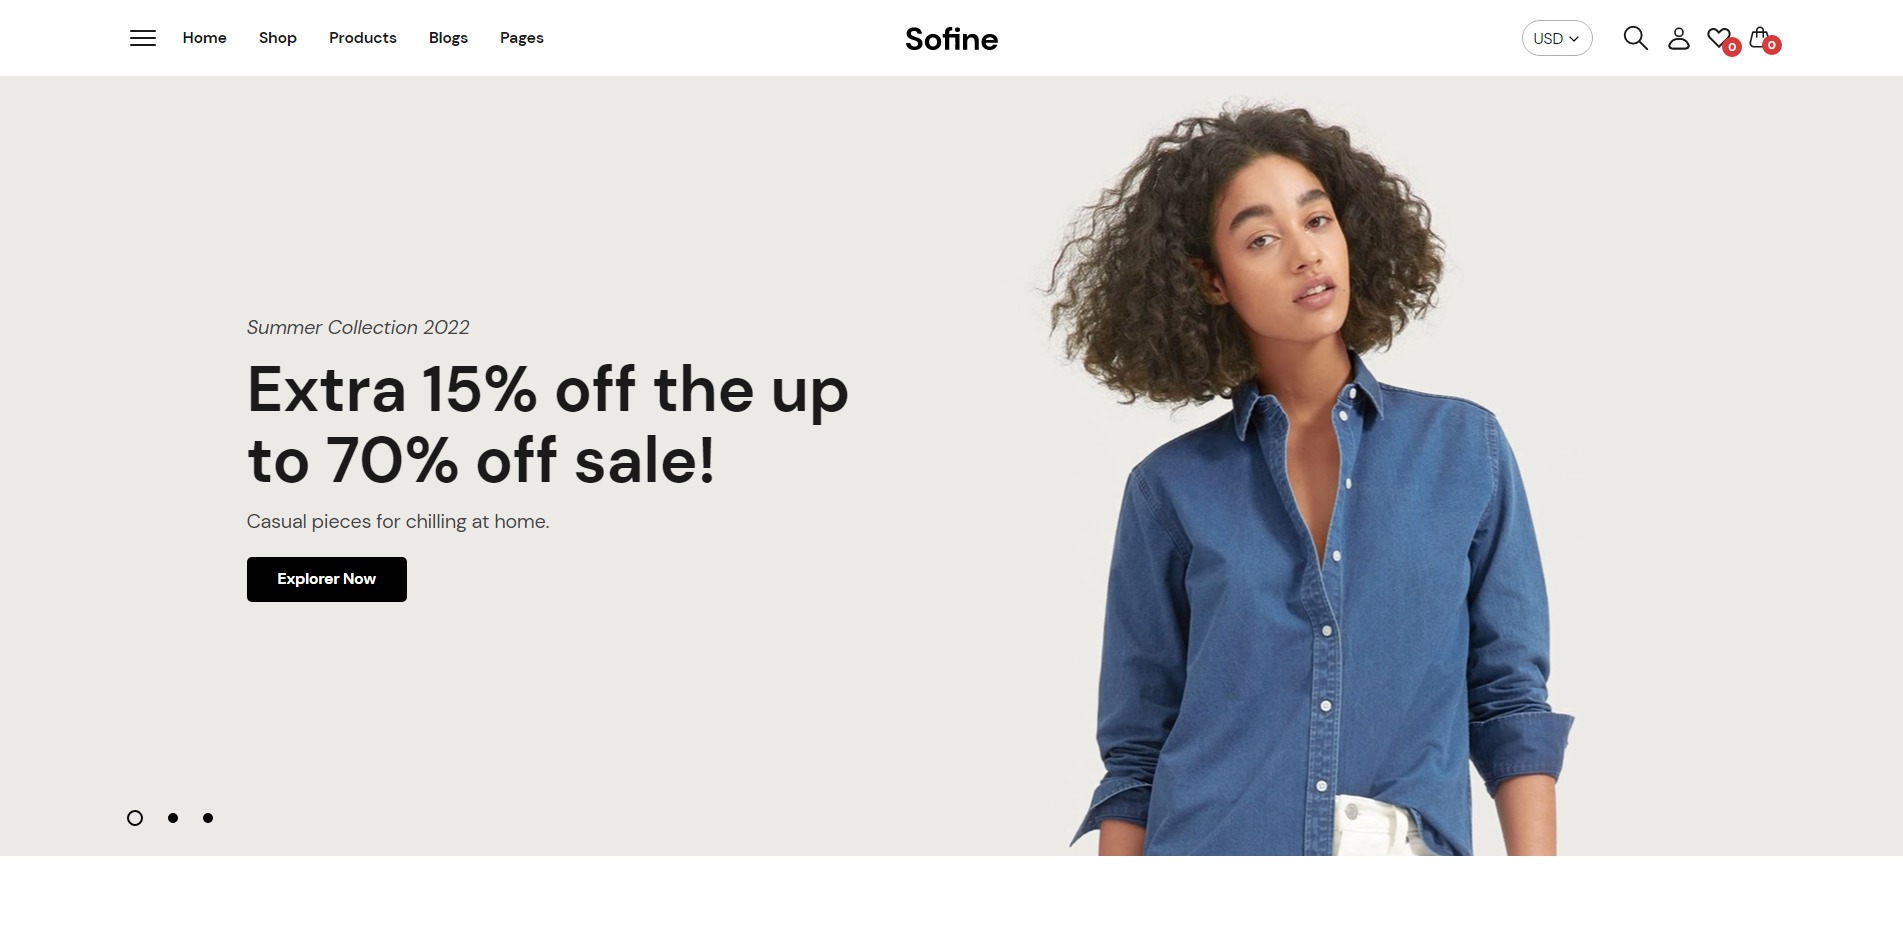 Sofine is a multipurpose minimalist theme for all the essential features of an online store.